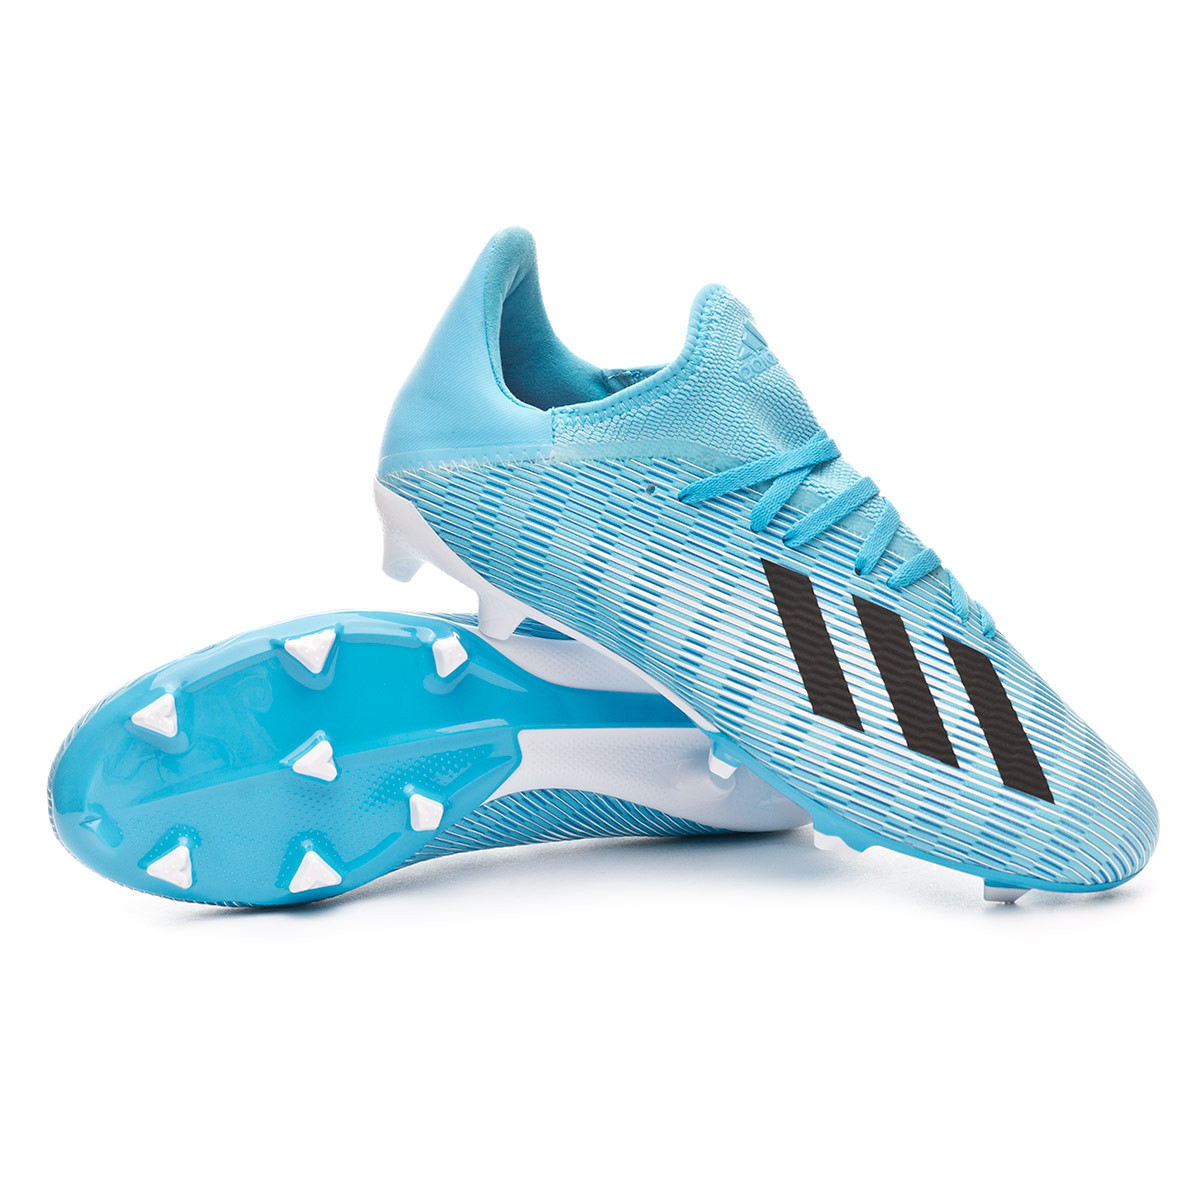 adidas x 19.3 firm ground cleats